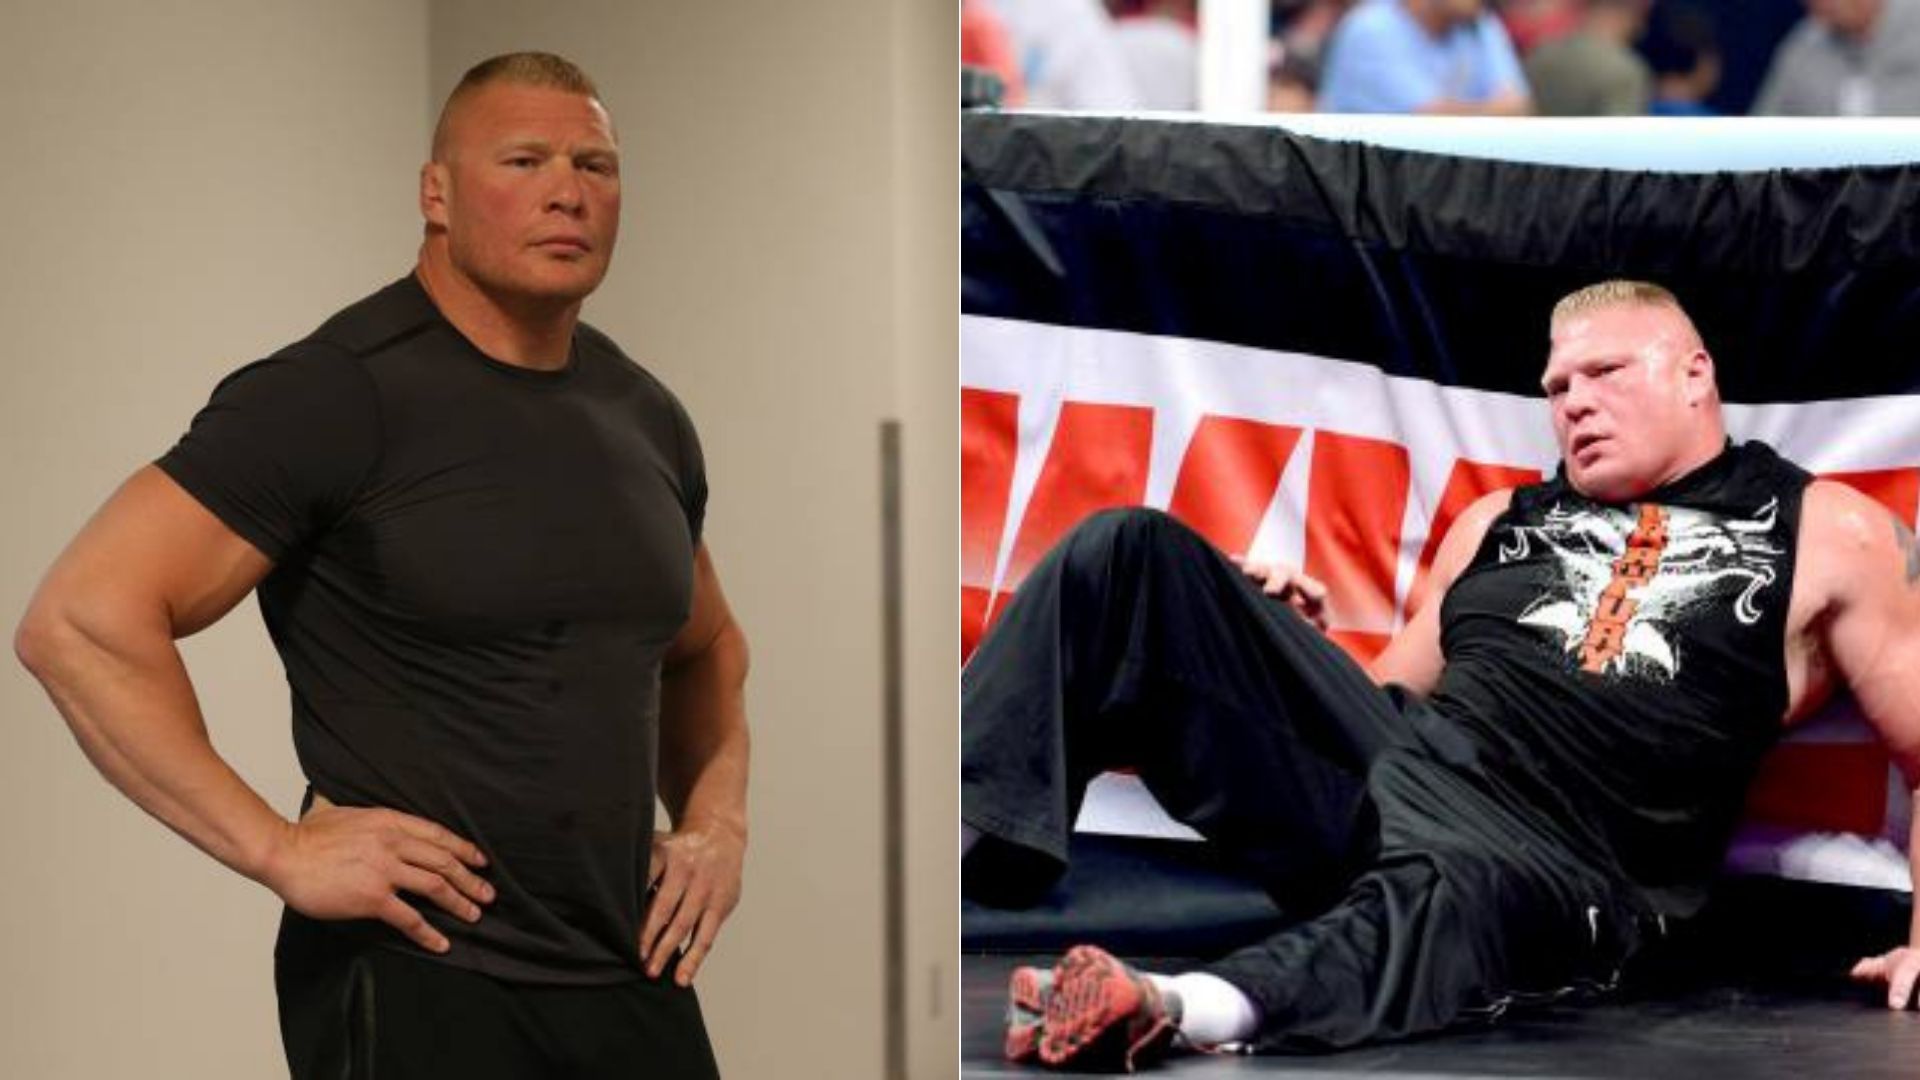 Brock Lesnar suffered a nasty fall while performing the Shooting Star Press at WrestleMania 19